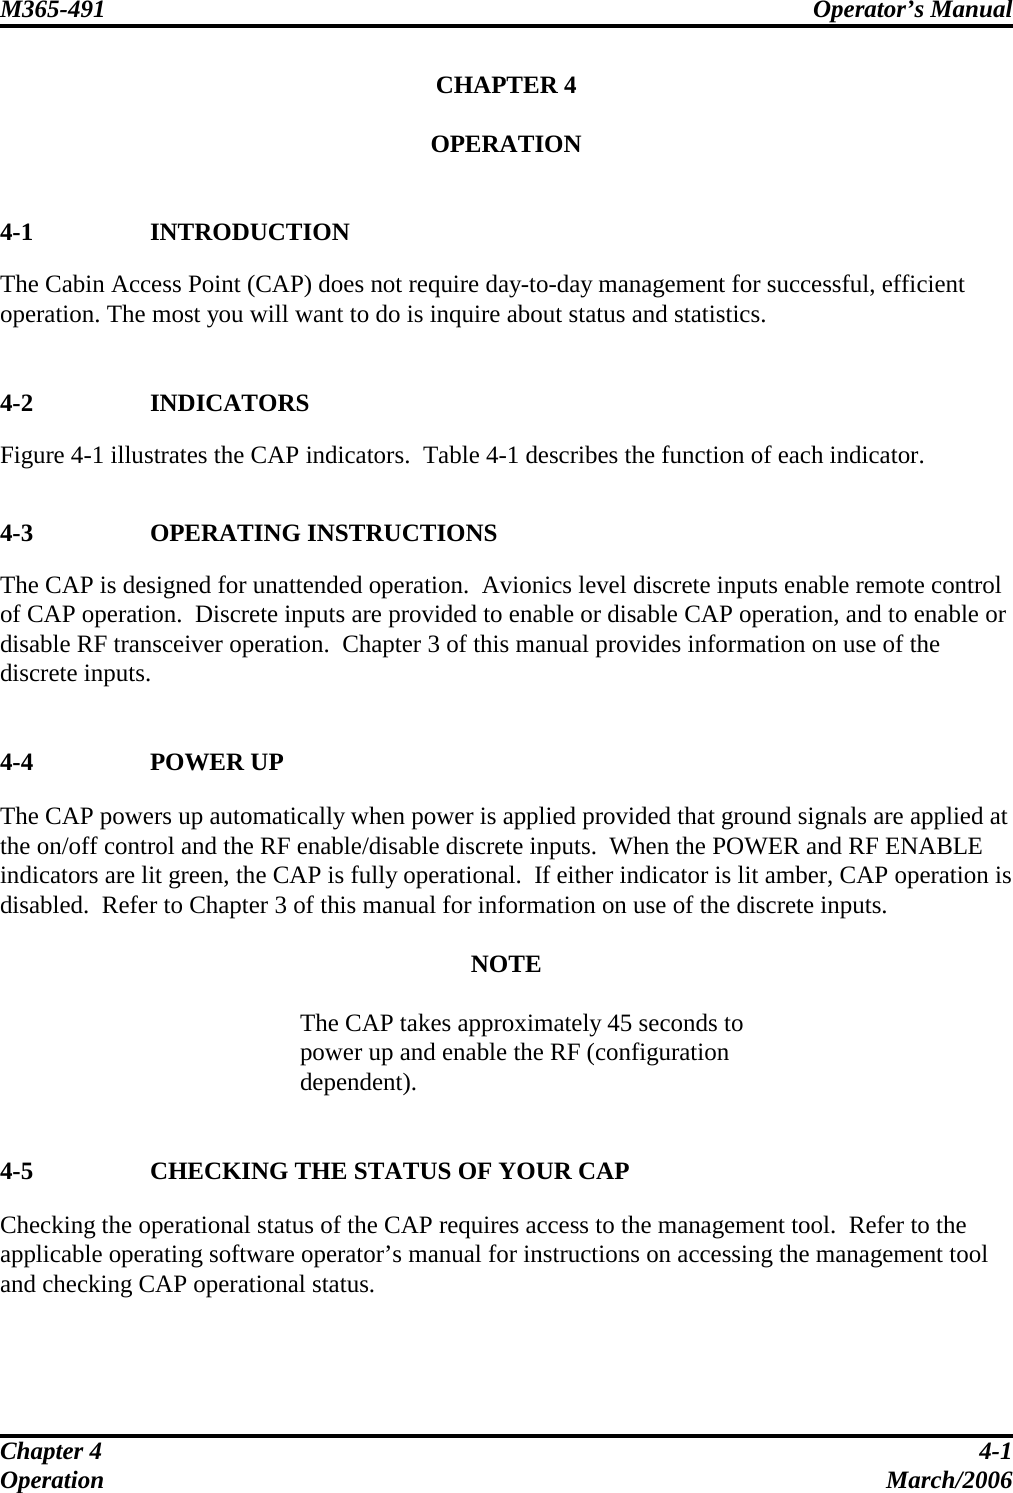 M365-491 Operator’s Manual   Chapter 4  4-1 Operation March/2006 CHAPTER 4  OPERATION   4-1 INTRODUCTION The Cabin Access Point (CAP) does not require day-to-day management for successful, efficient operation. The most you will want to do is inquire about status and statistics.   4-2 INDICATORS Figure 4-1 illustrates the CAP indicators.  Table 4-1 describes the function of each indicator.   4-3 OPERATING INSTRUCTIONS The CAP is designed for unattended operation.  Avionics level discrete inputs enable remote control of CAP operation.  Discrete inputs are provided to enable or disable CAP operation, and to enable or disable RF transceiver operation.  Chapter 3 of this manual provides information on use of the discrete inputs.   4-4 POWER UP The CAP powers up automatically when power is applied provided that ground signals are applied at the on/off control and the RF enable/disable discrete inputs.  When the POWER and RF ENABLE indicators are lit green, the CAP is fully operational.  If either indicator is lit amber, CAP operation is disabled.  Refer to Chapter 3 of this manual for information on use of the discrete inputs.  NOTE  The CAP takes approximately 45 seconds to power up and enable the RF (configuration dependent).   4-5 CHECKING THE STATUS OF YOUR CAP Checking the operational status of the CAP requires access to the management tool.  Refer to the applicable operating software operator’s manual for instructions on accessing the management tool and checking CAP operational status.   